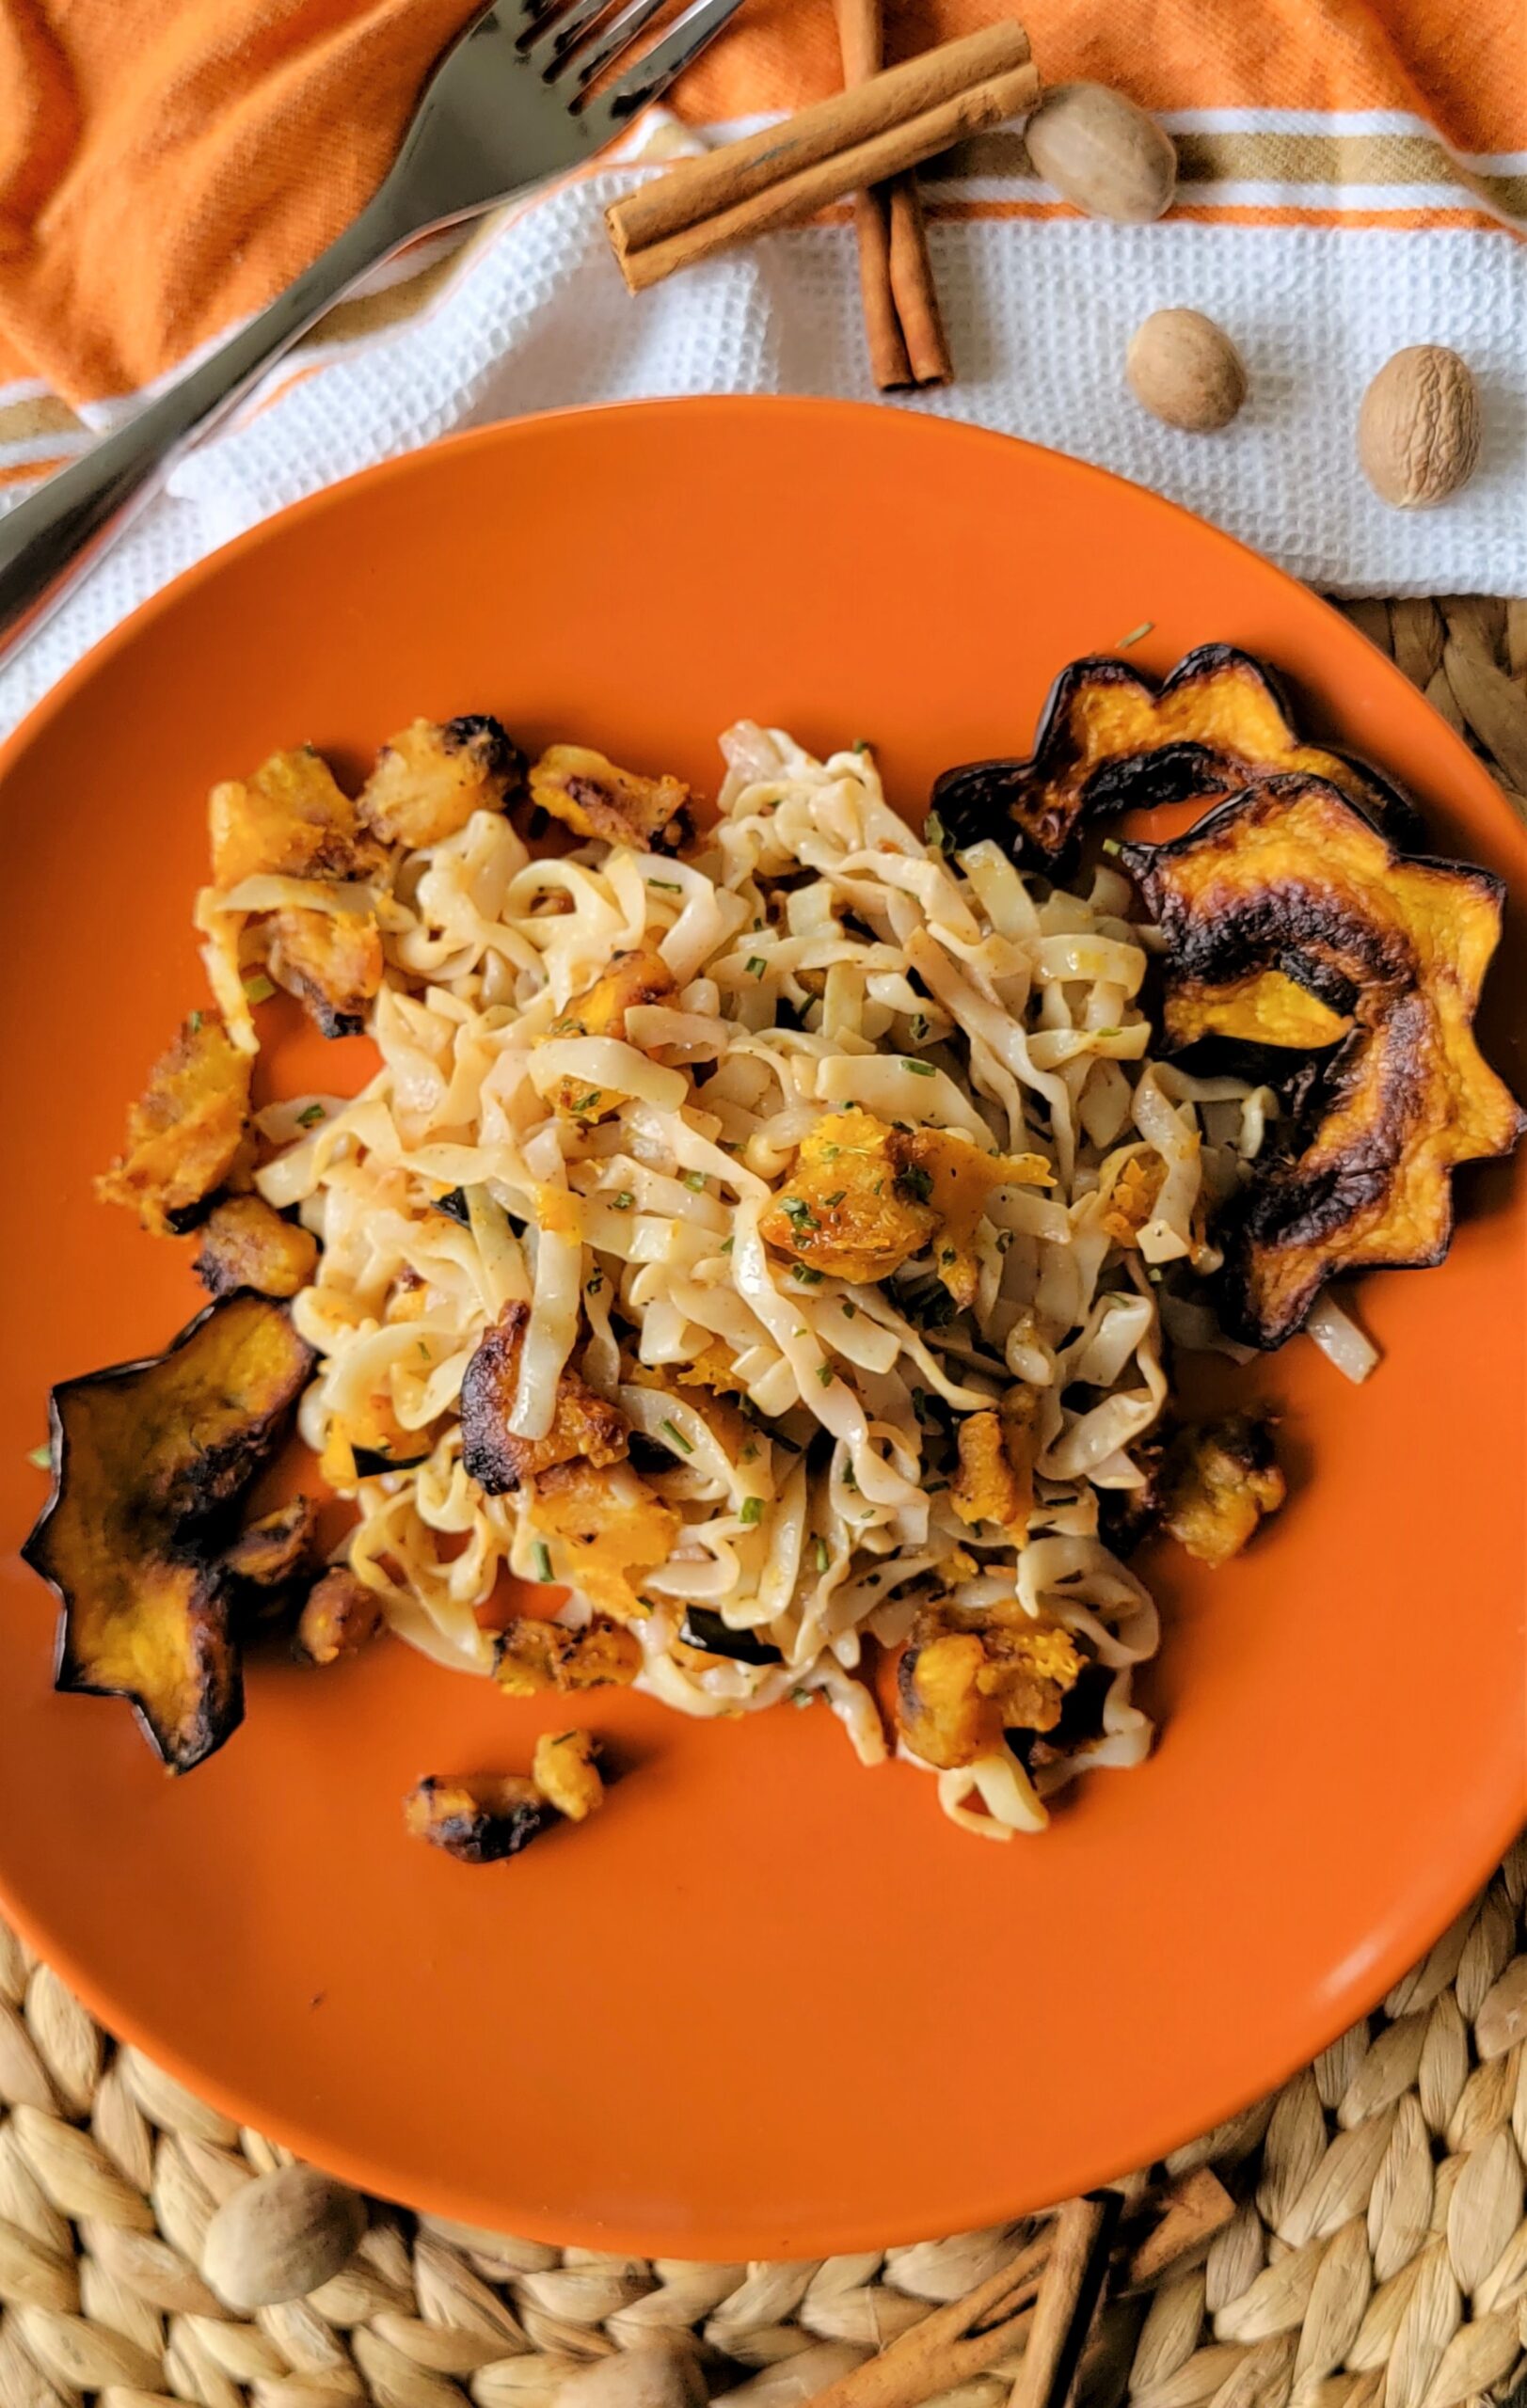 ACORN SQUASH WITH PLANT BASED BUTTER AND ZERO CARB NOODLES